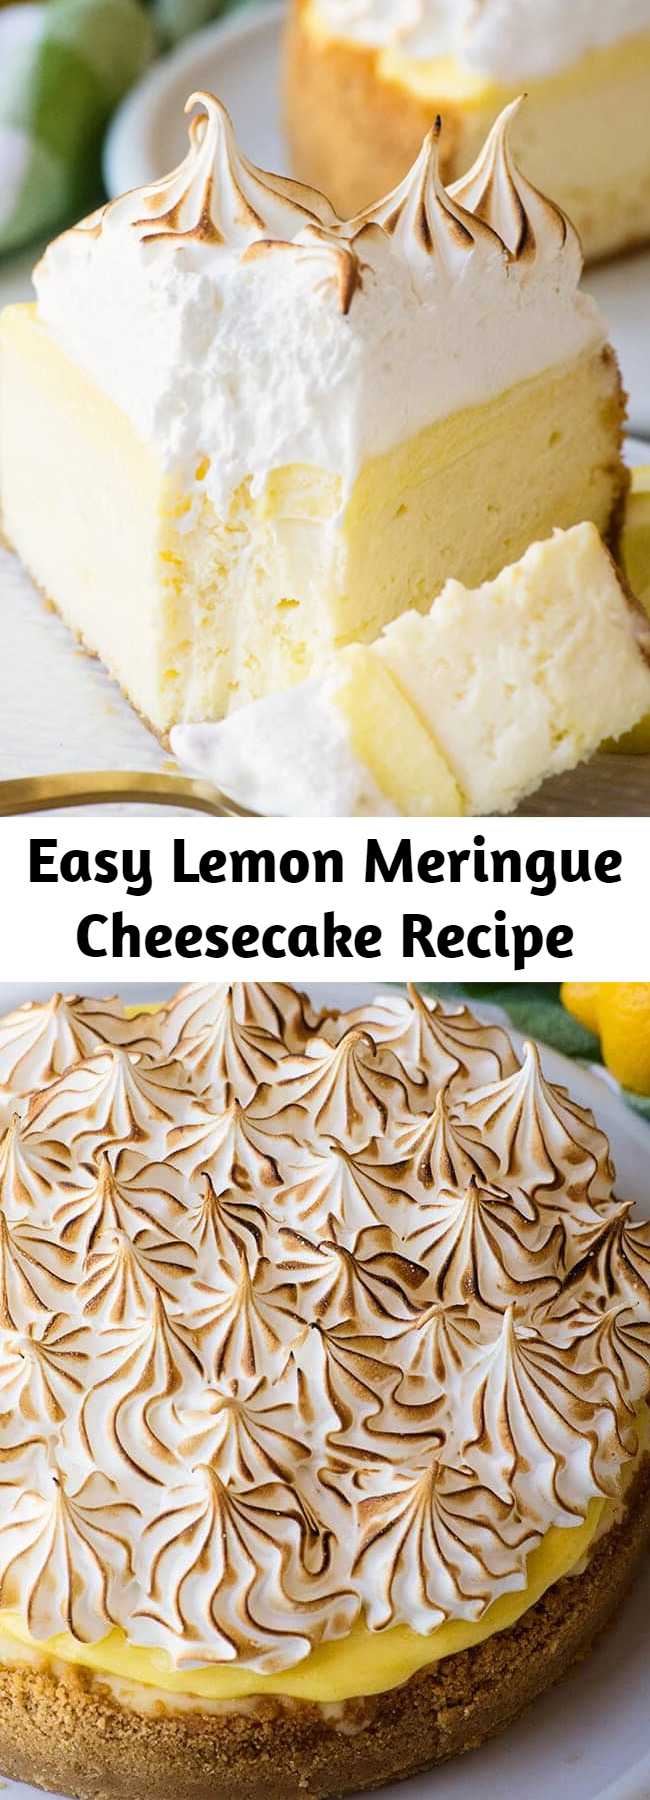 Easy Lemon Meringue Cheesecake Recipe - This Lemon meringue pie cheesecake is decadent and rich – a lemon cheesecake with a ribbon of homemade lemon curd running through the middle, another layer of lemon curd spread across the top. Baked in a Lemon cookie crumb crust and topped with a fluffy toasted meringue every bite is amazing. #dessert #holidayrecipes #Lemonmeringue #cheesecake #partytreats